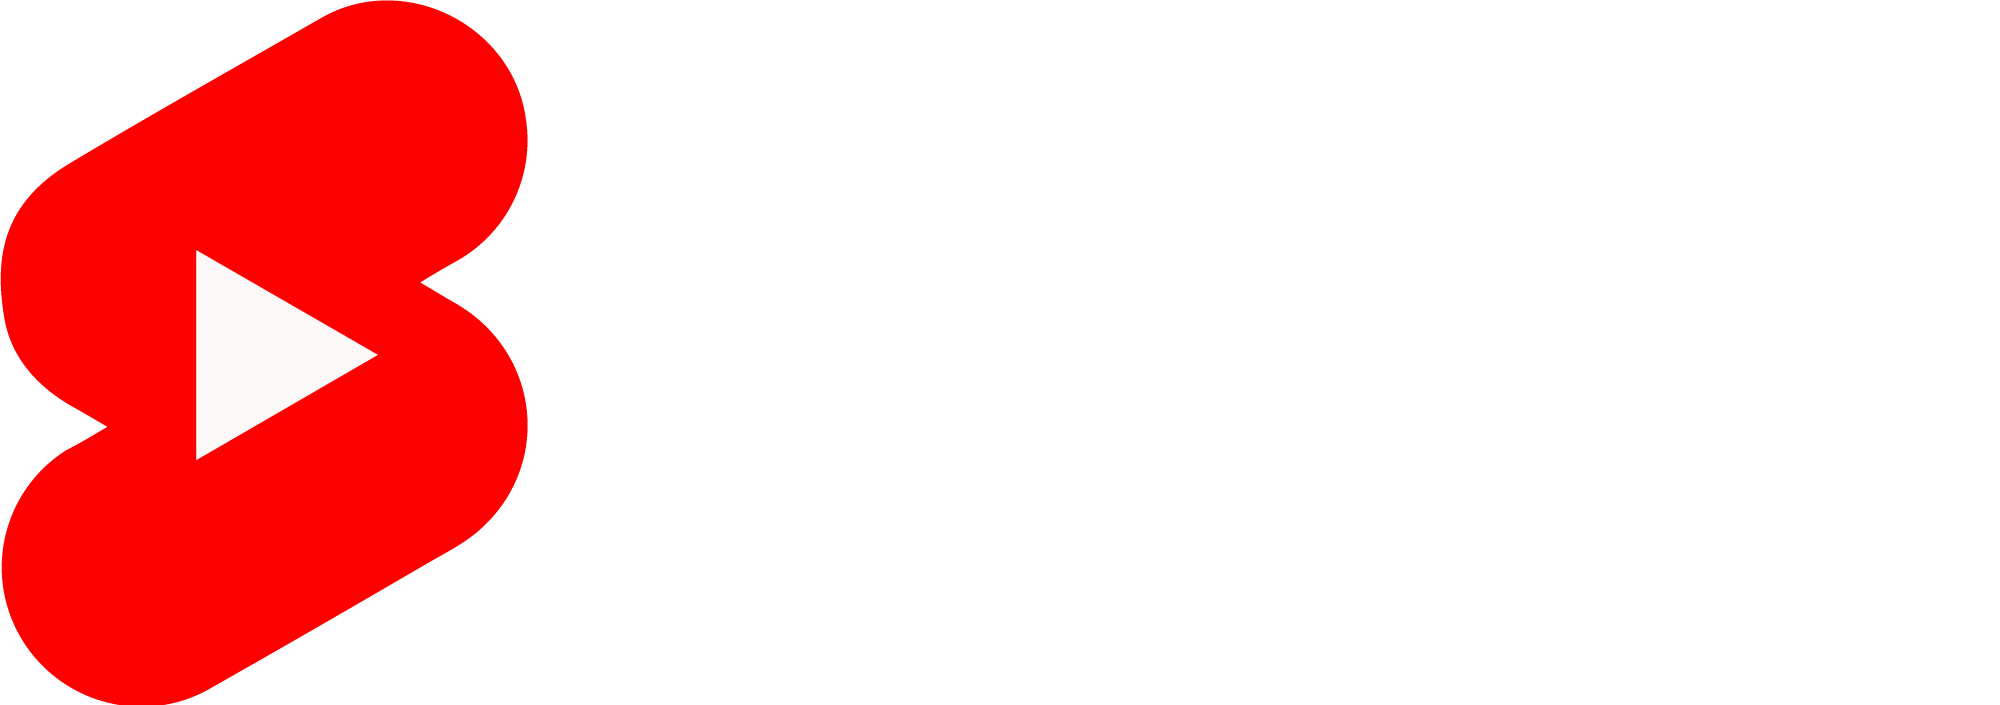 YouTube Shorts Logo PNG With Transparent Background